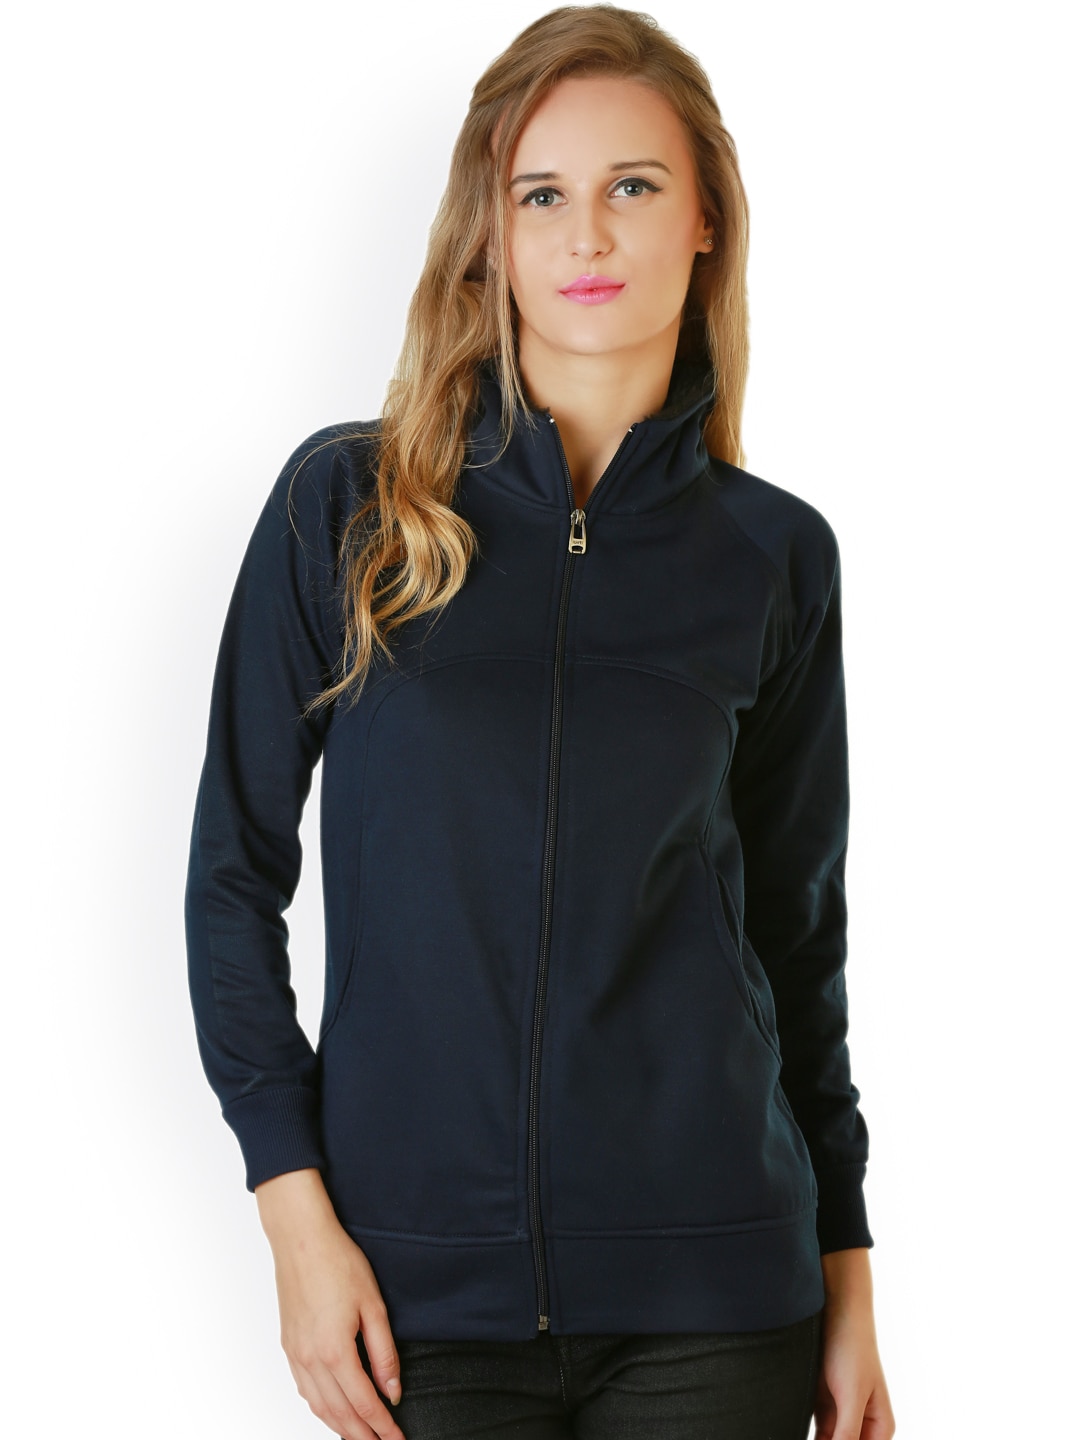 Belle Fille Navy Hooded Jacket Price in India